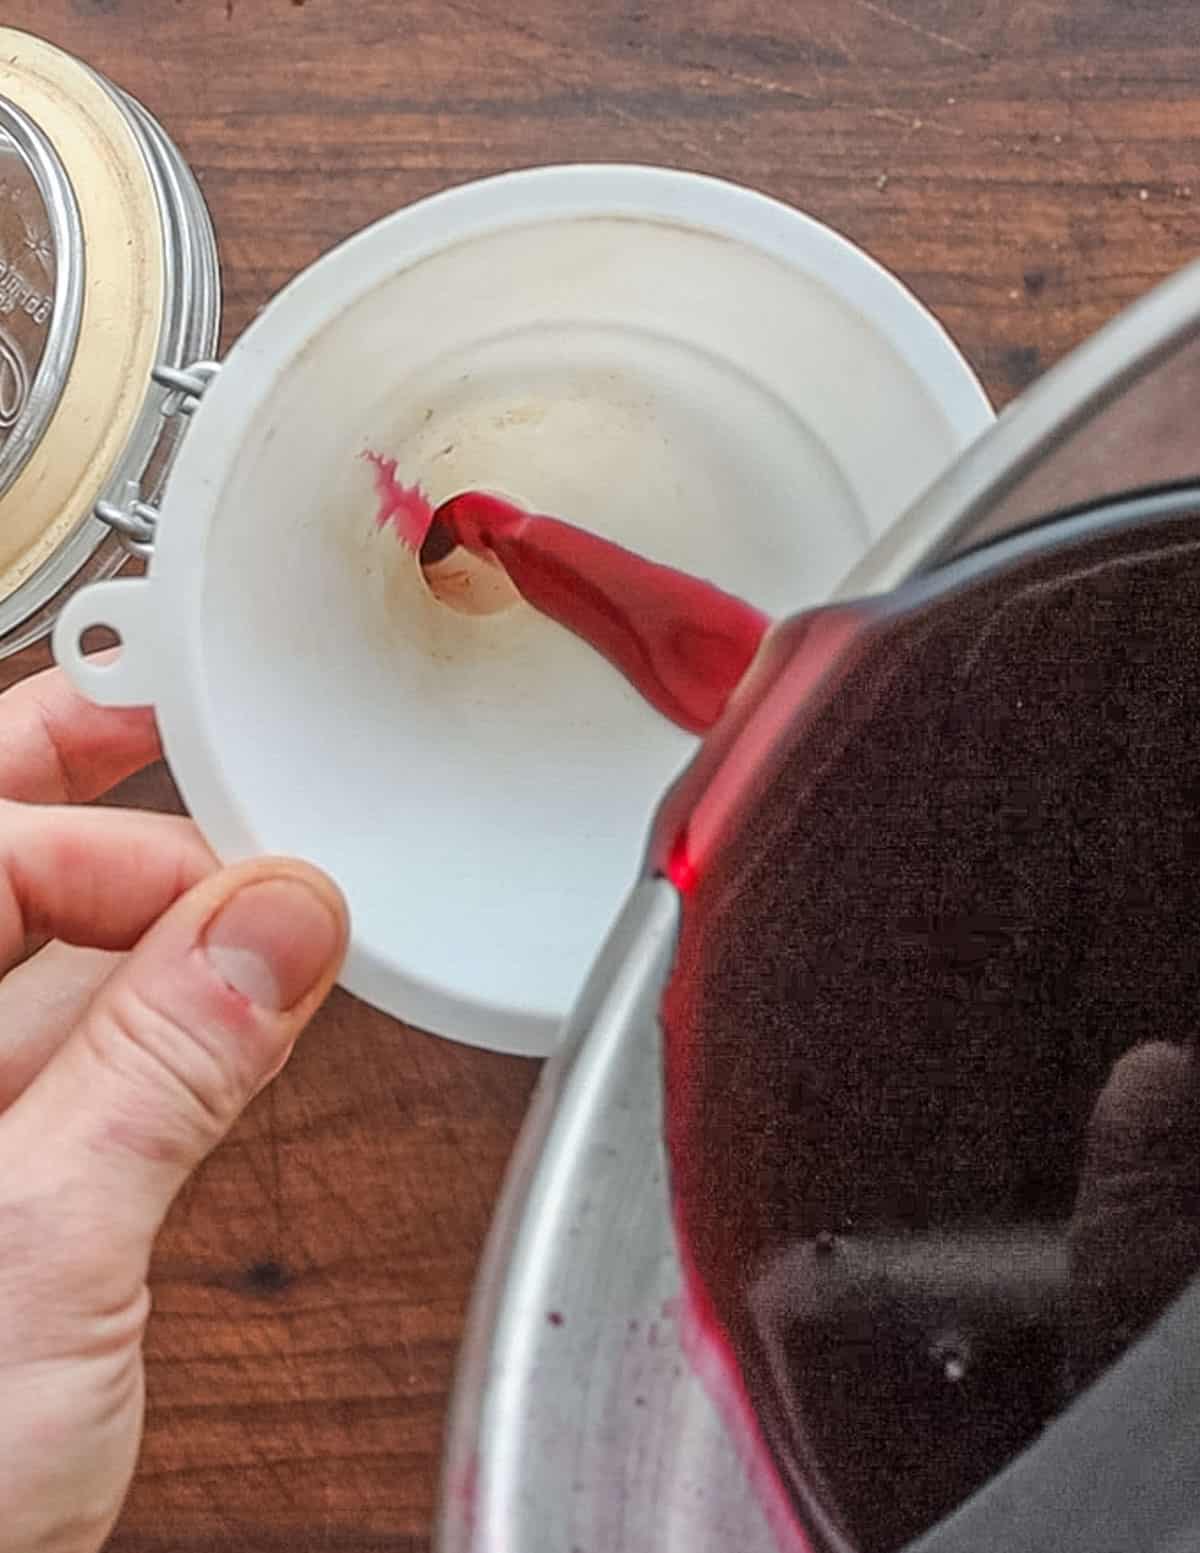 Pouring blueberry syrup into a jar using a funnel.